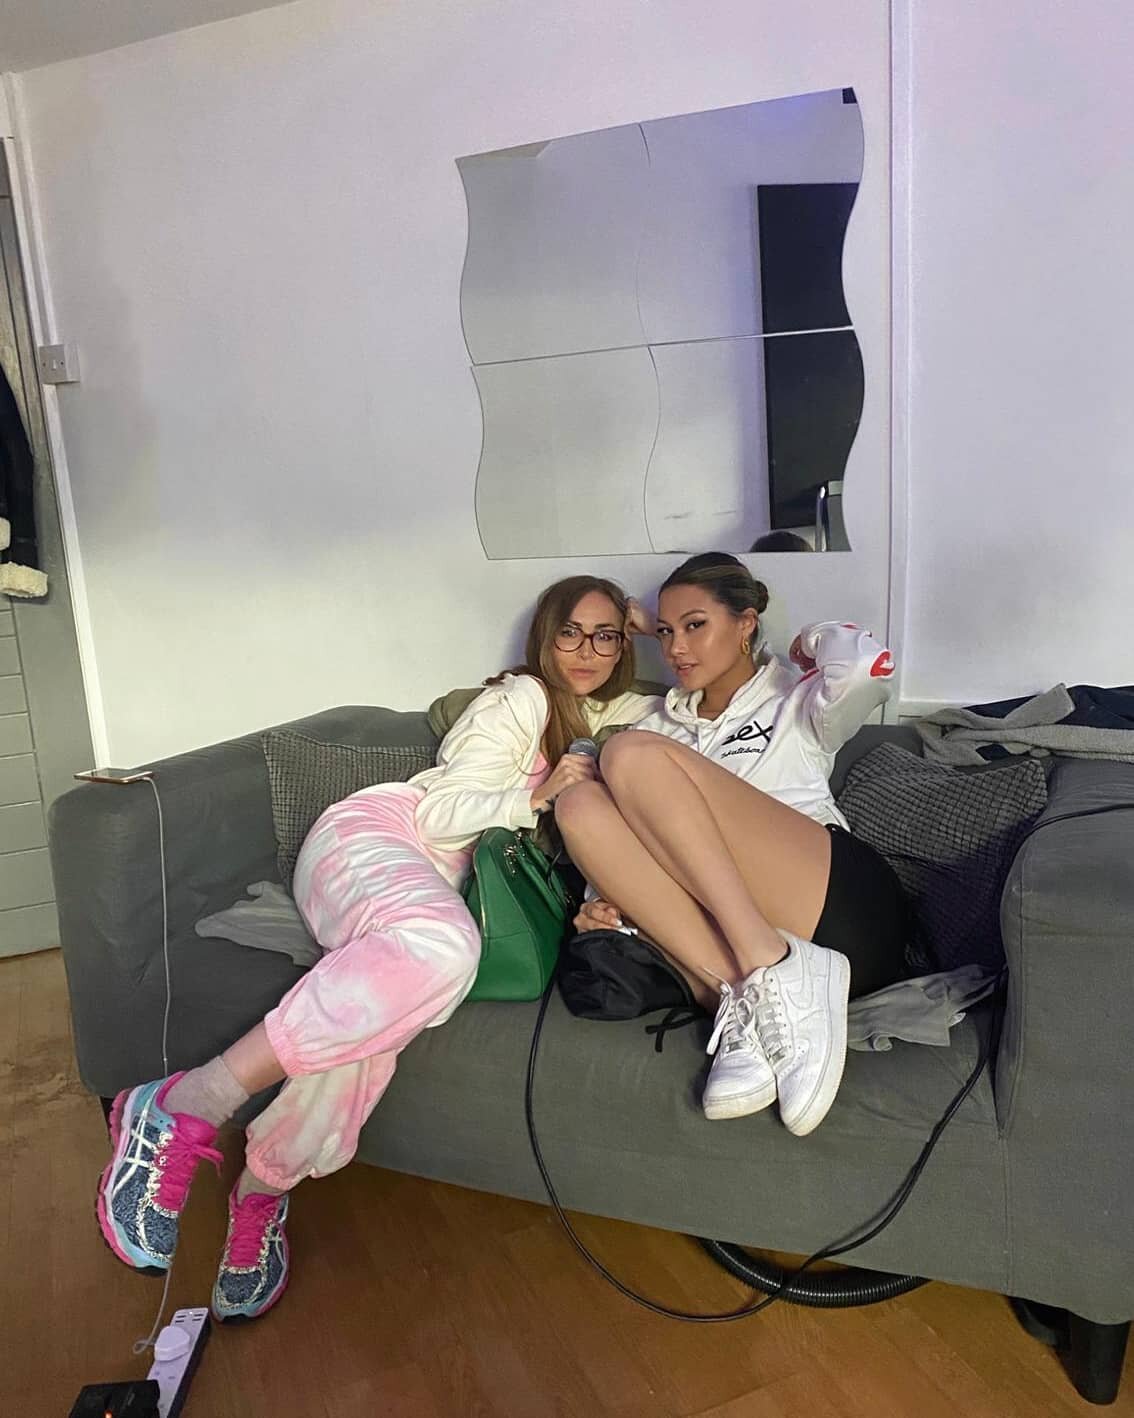 👑👑 Queen's have arrived. 💅💅
.
.
In session with @chantelleleeofficial &amp; @ladyvmusic #hitmakers 🎹✍🏼
.
.
Make sure you follow 📩 @chantelleleeofficial @spotify to get the first to the heat coming #producedbyDotInc 🎹
#dotinc #chantellelee #sp